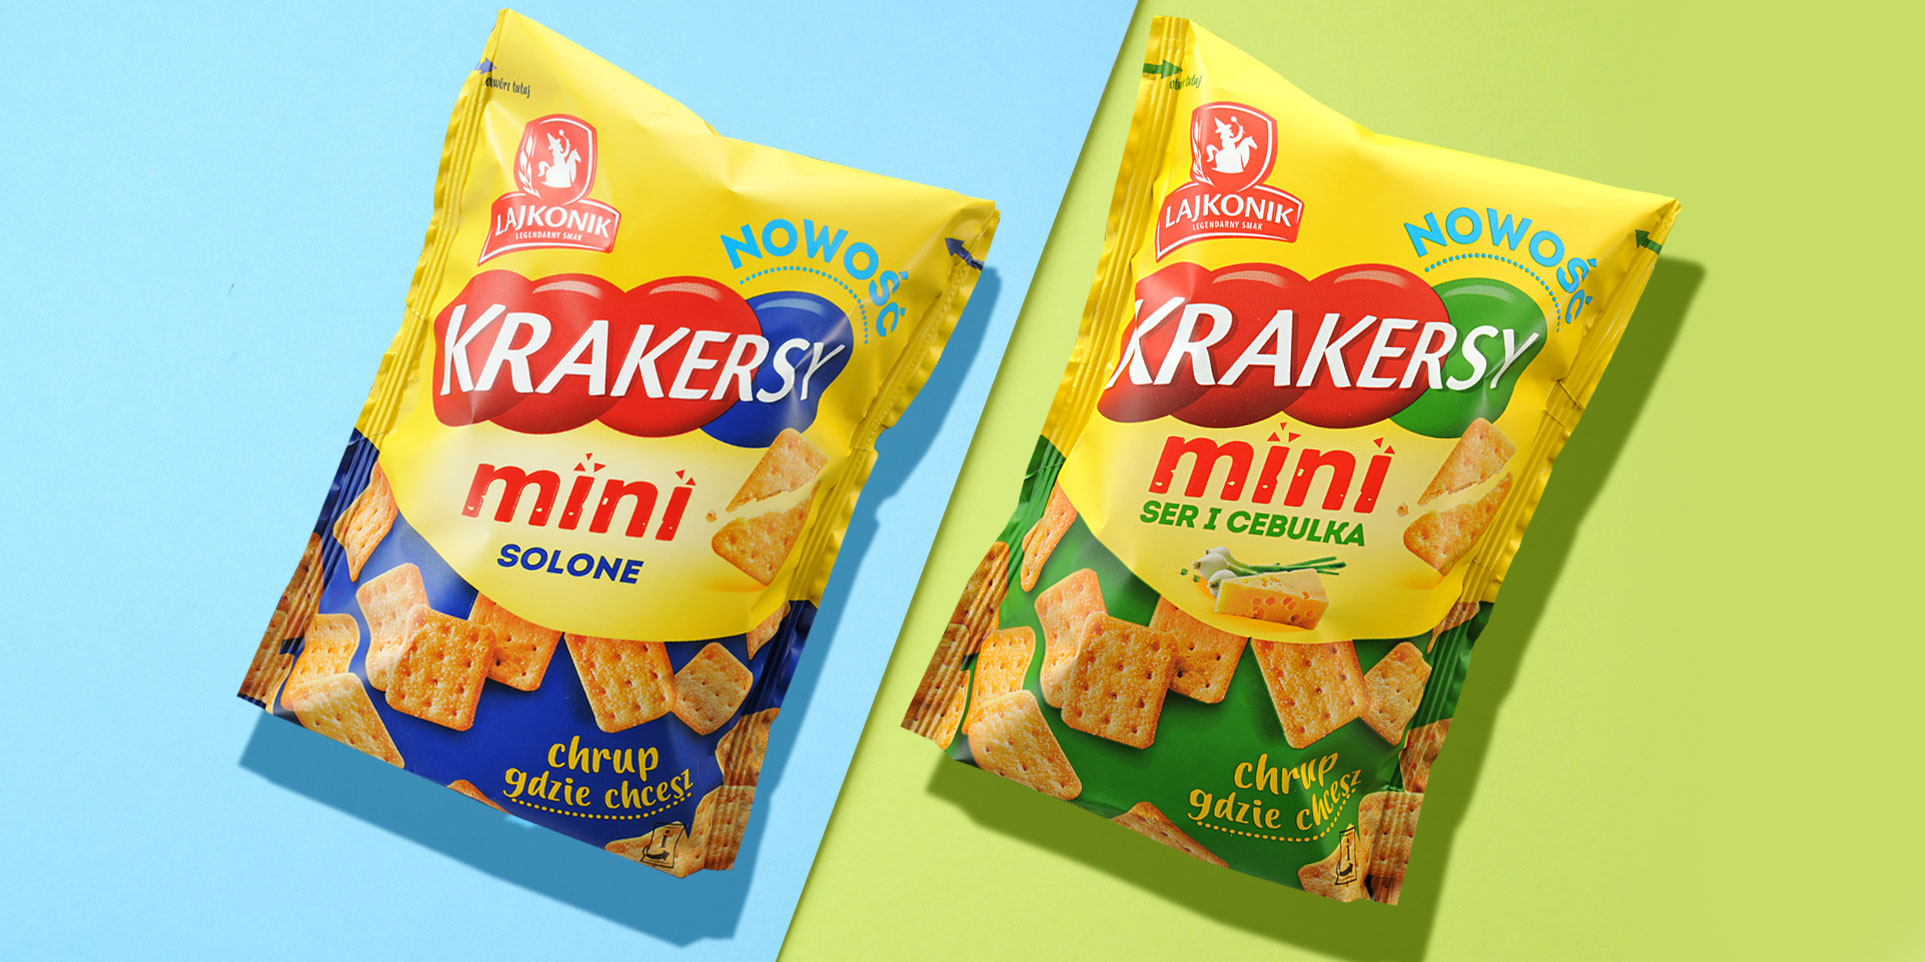 Lajkonik Mini-Crackers packaging design - salty and spring onion with cheese.